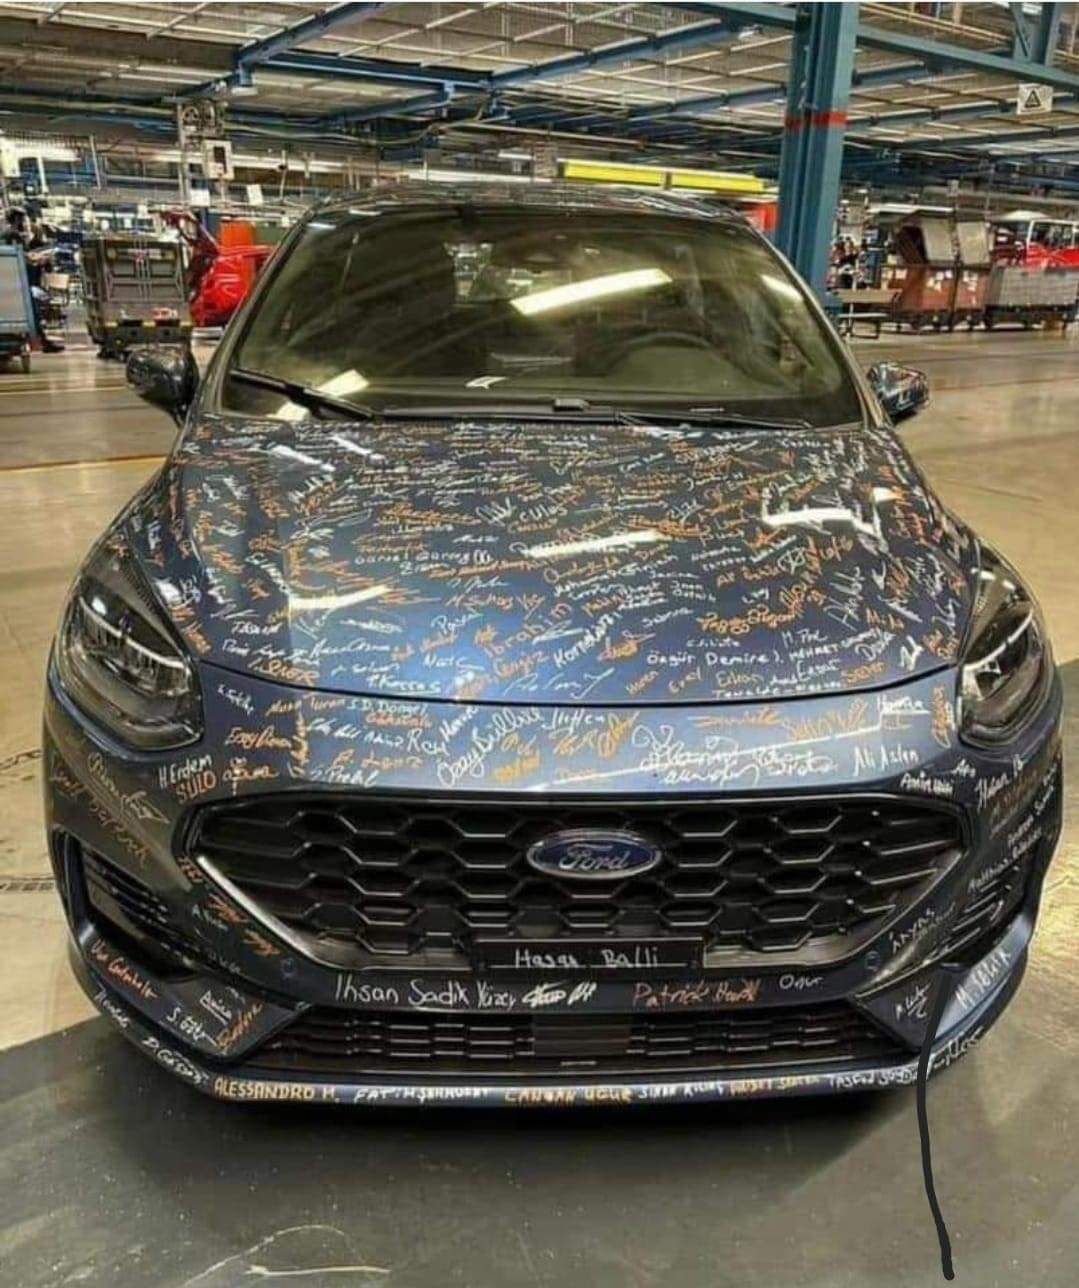 The Last 2023 Fiesta rolling off the production line, signed.